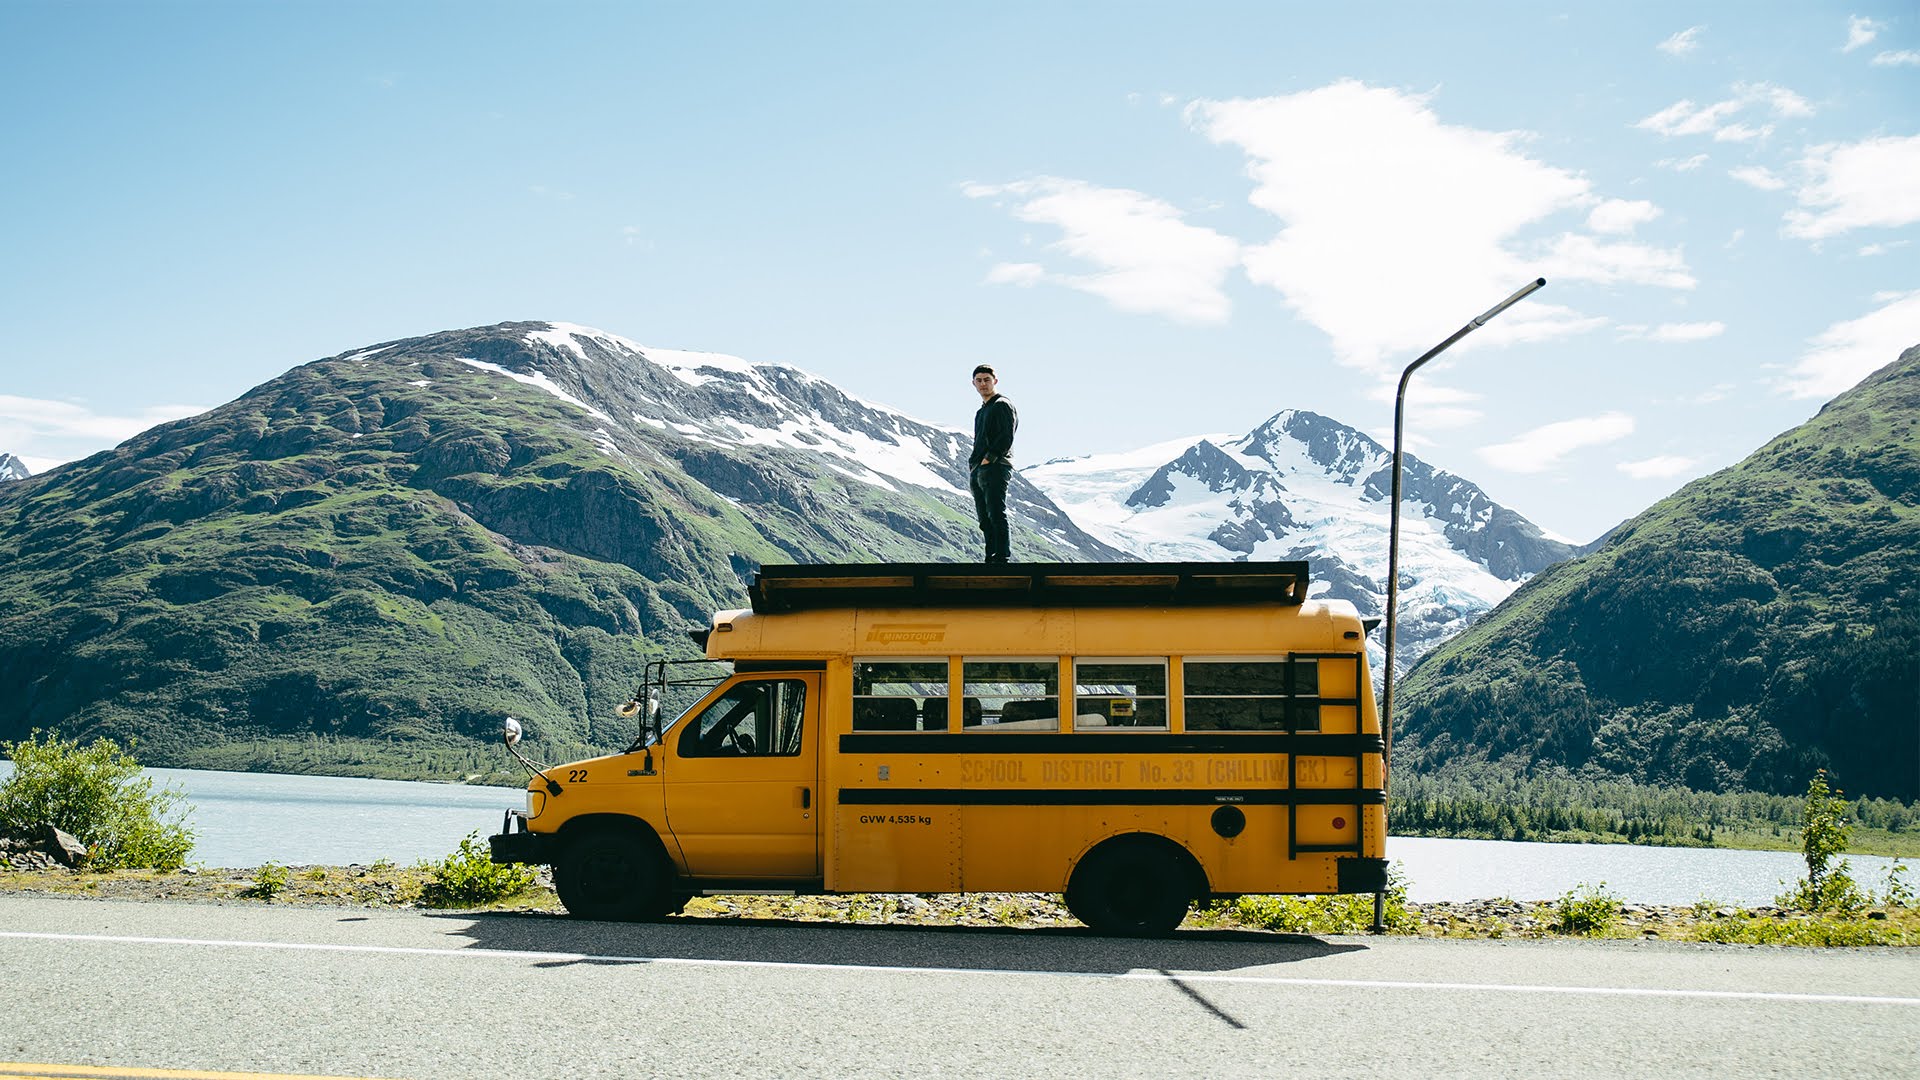 Check out this amazing road trip film with an old schoolbus through Alaska!